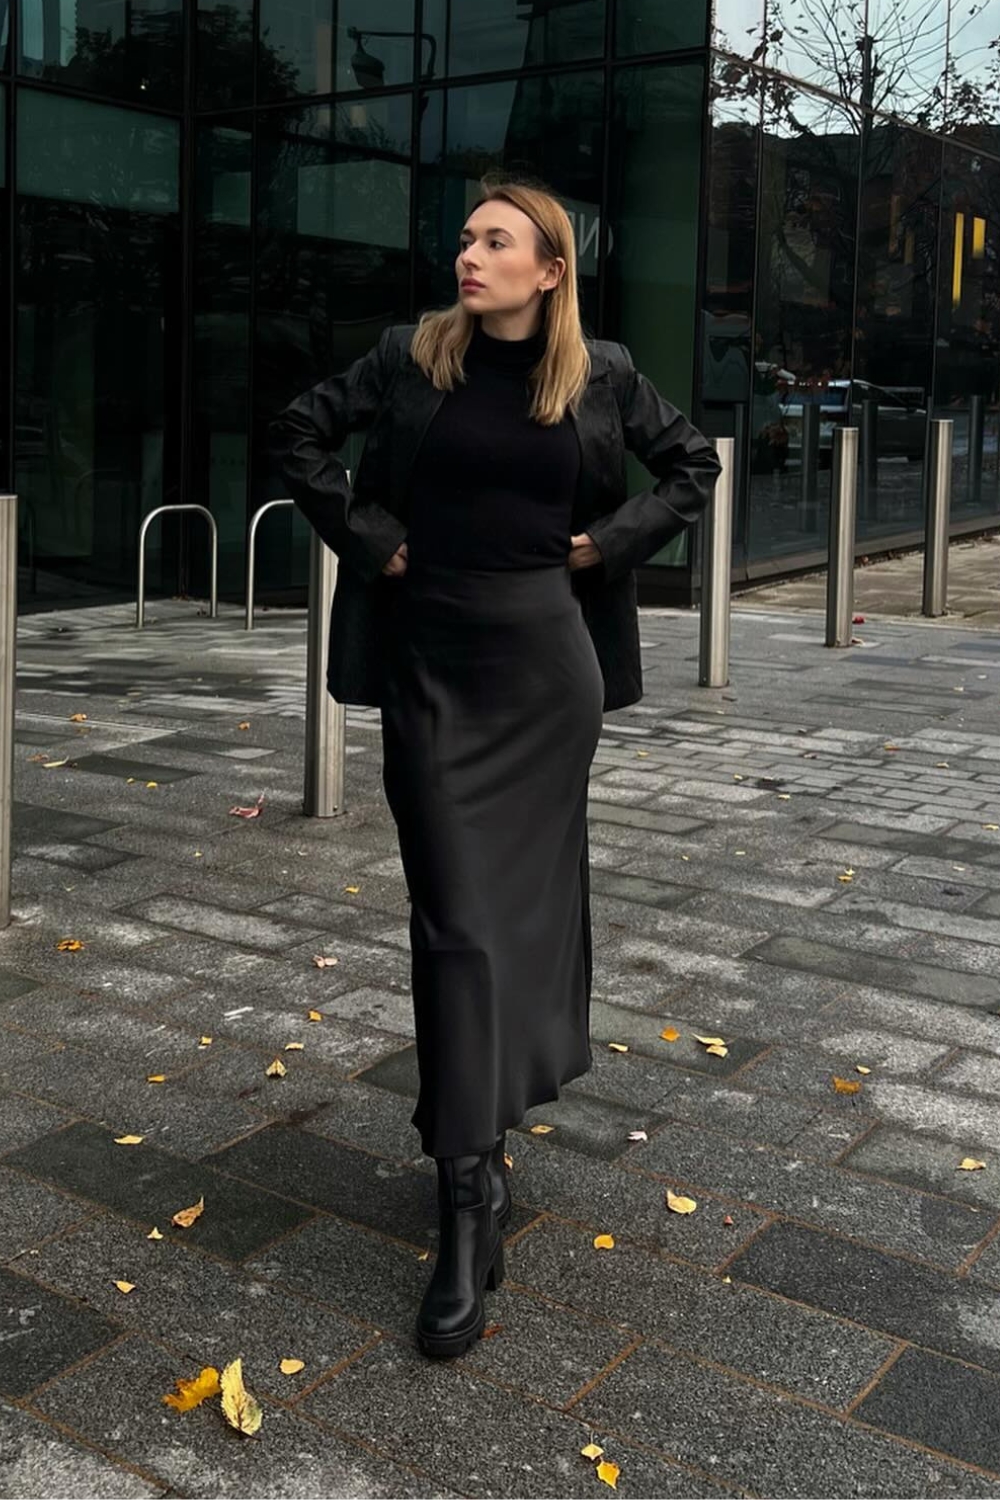 Black Satin Skirt with Black Blazer and Black Sweater Outfit